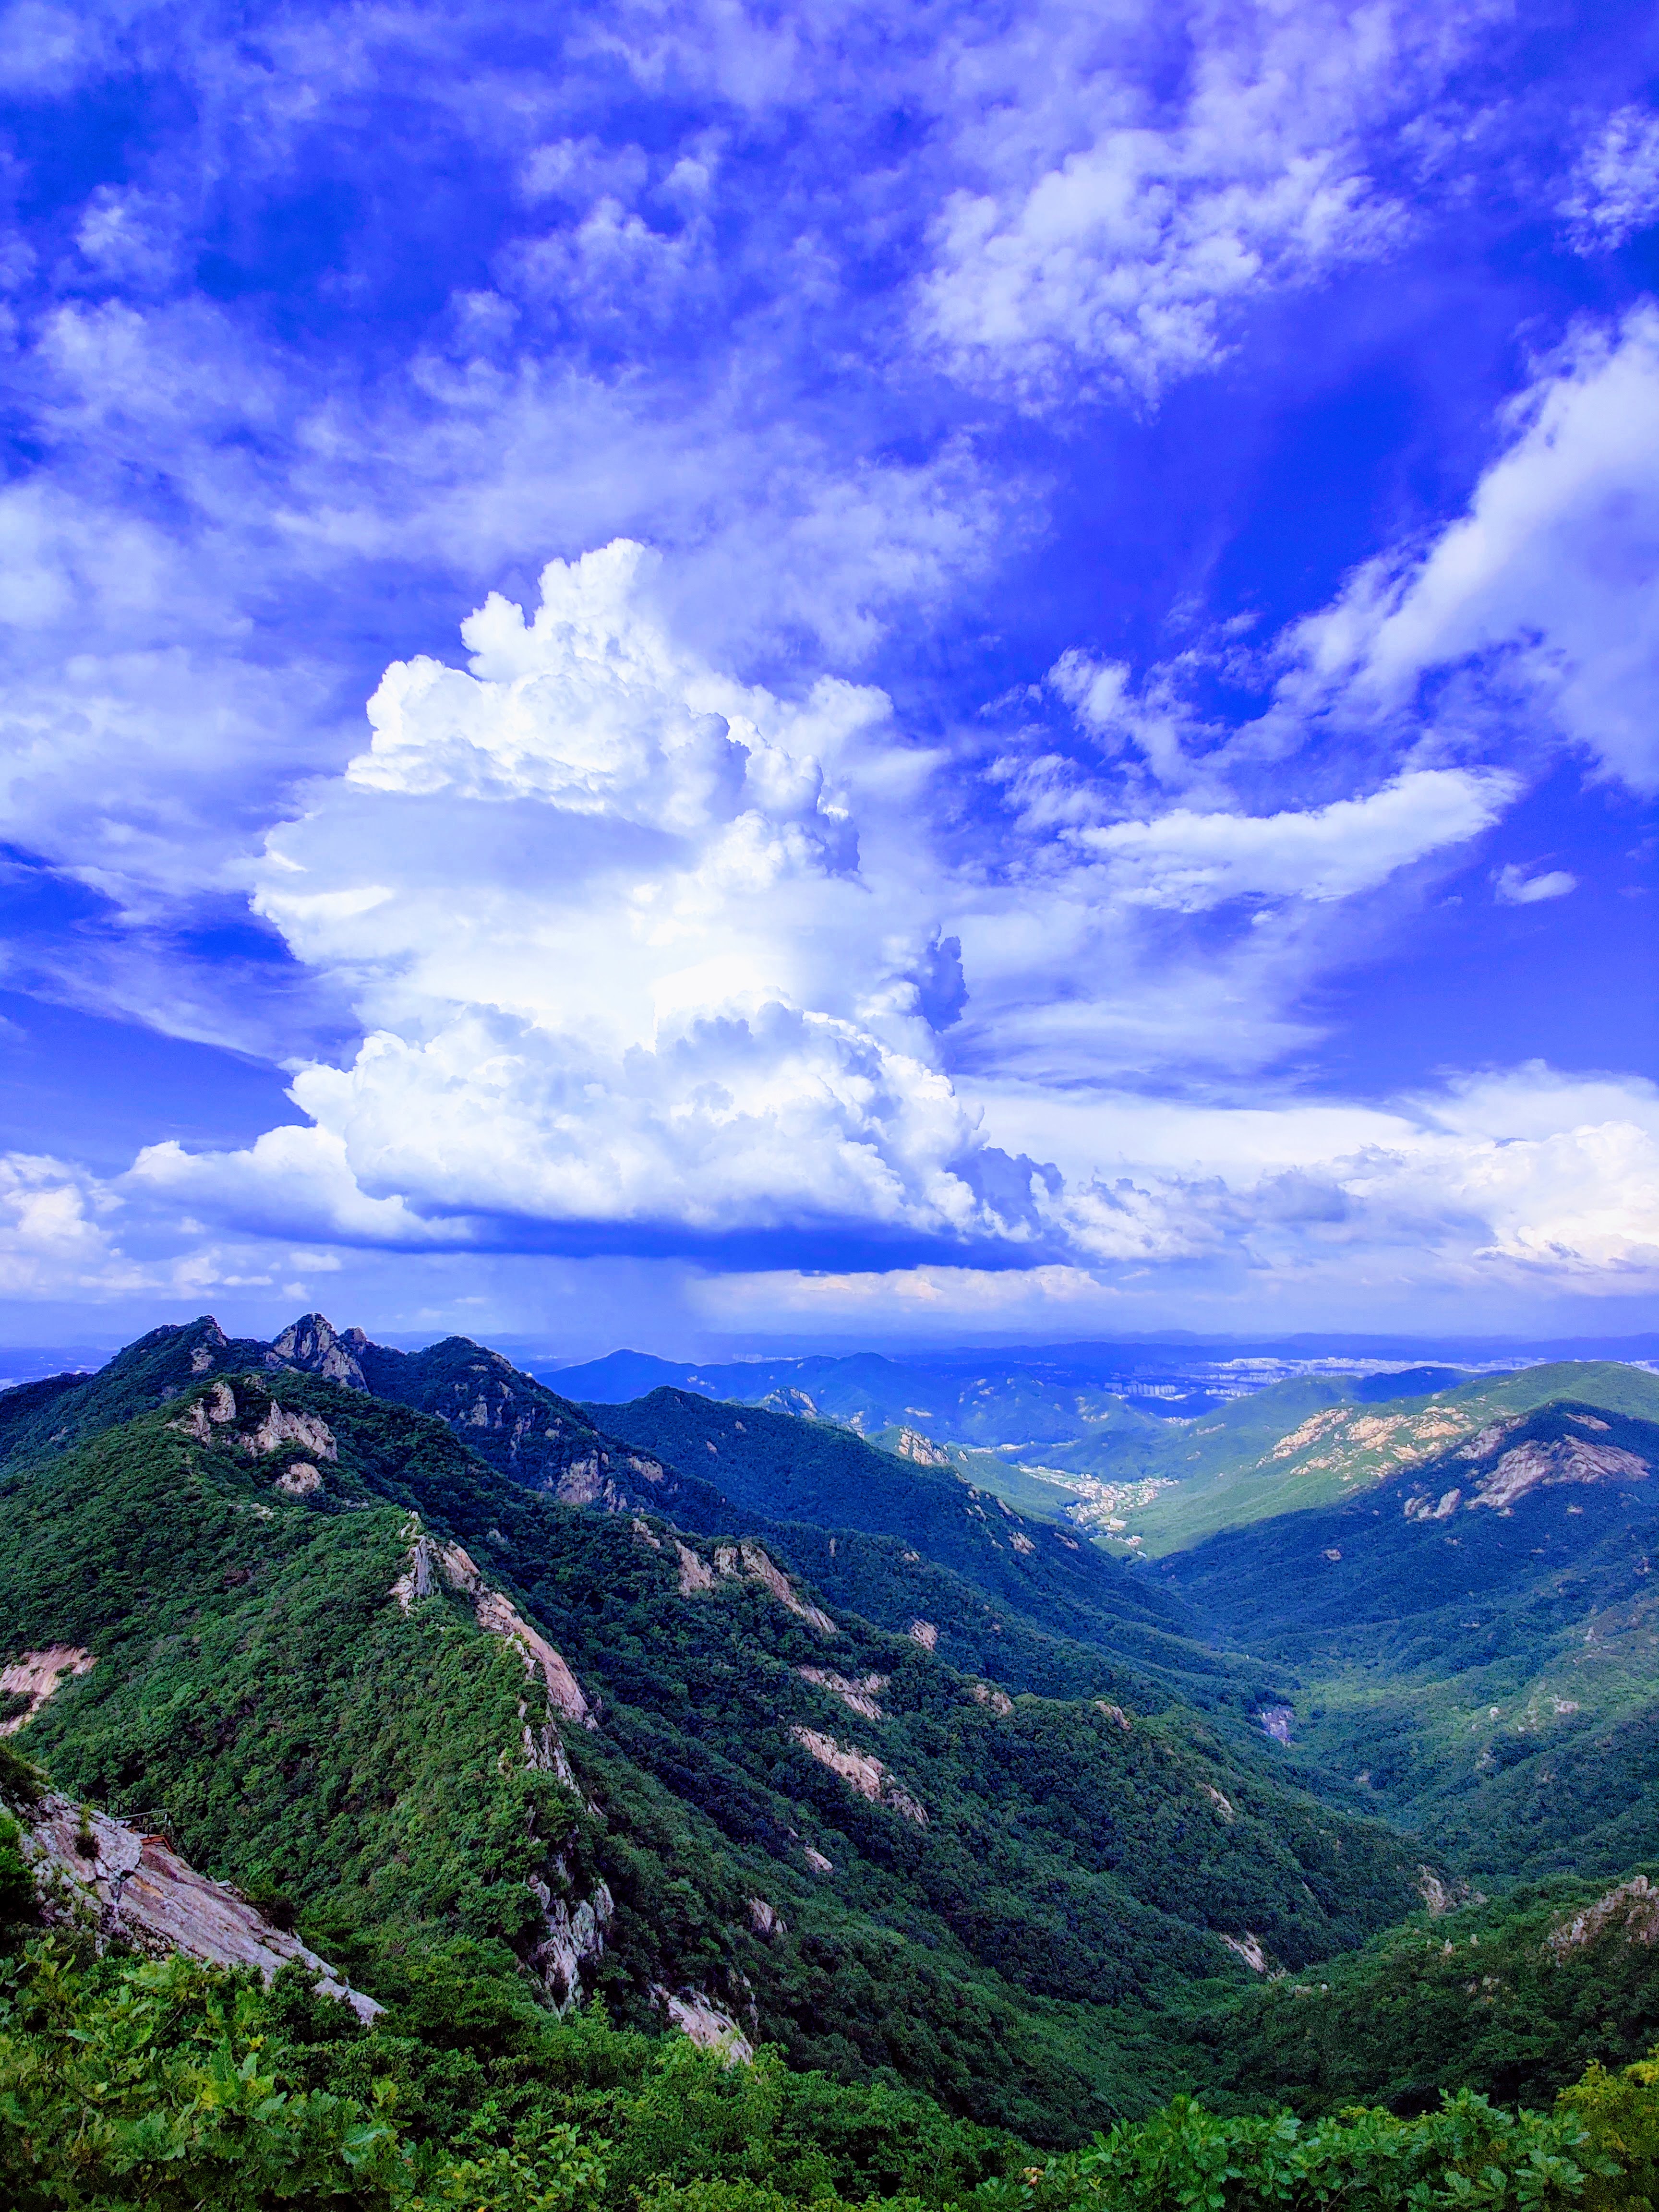 a rugged mountainous ridgeline made of tan rock struggles to appear through lush trees and foliage next to a valley as a massive thunderhead is building far in the distance over the mountains of South Korea